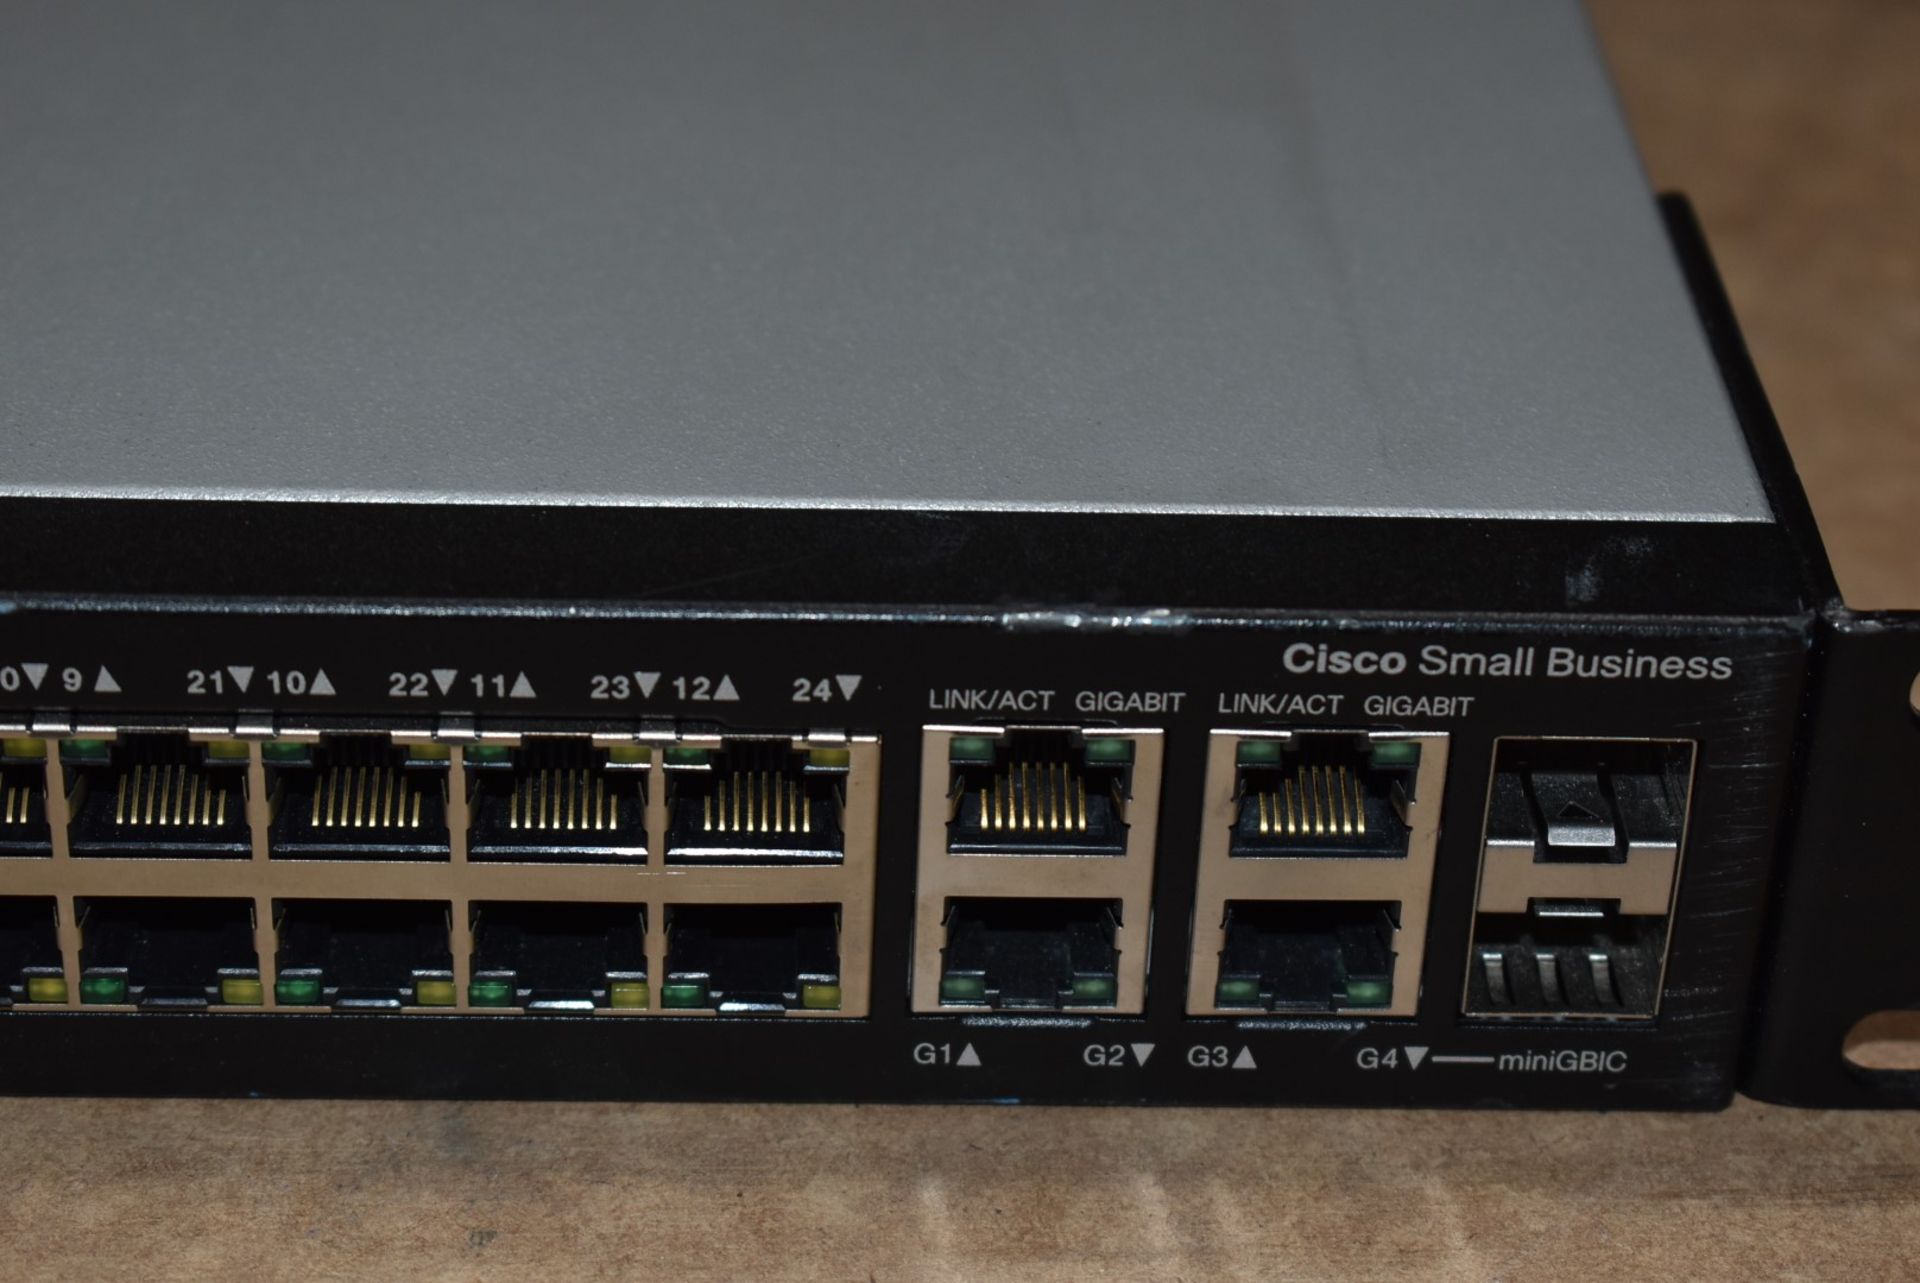 1 x Cisco SF300-24P 24-Port 10/100 PoE Managed Switch - Includes Power Cable - Ref: MPC156 CA - - Image 4 of 9